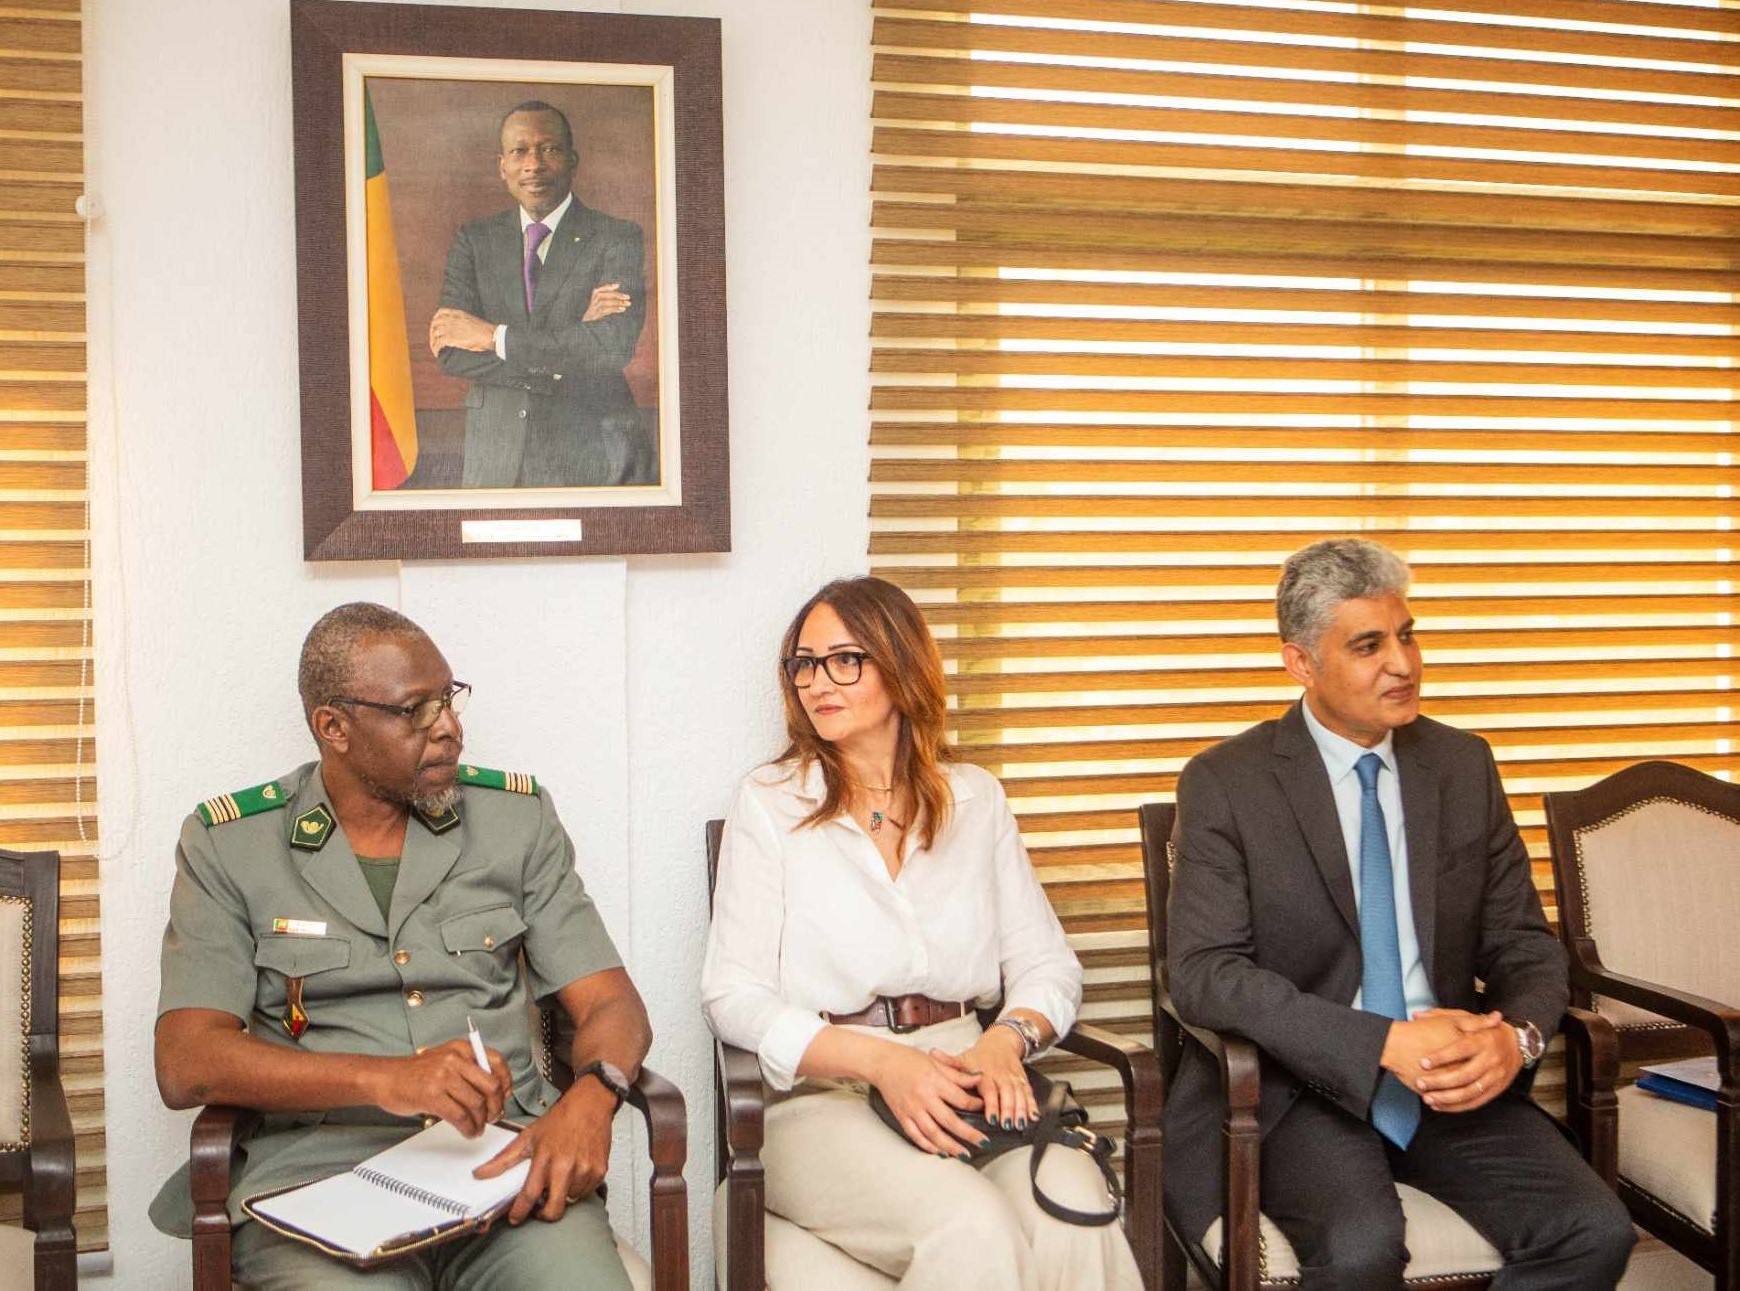  The Minister of Living Environment and Transport of Benin receives a delegation from the Sahara and Sahel Observatory